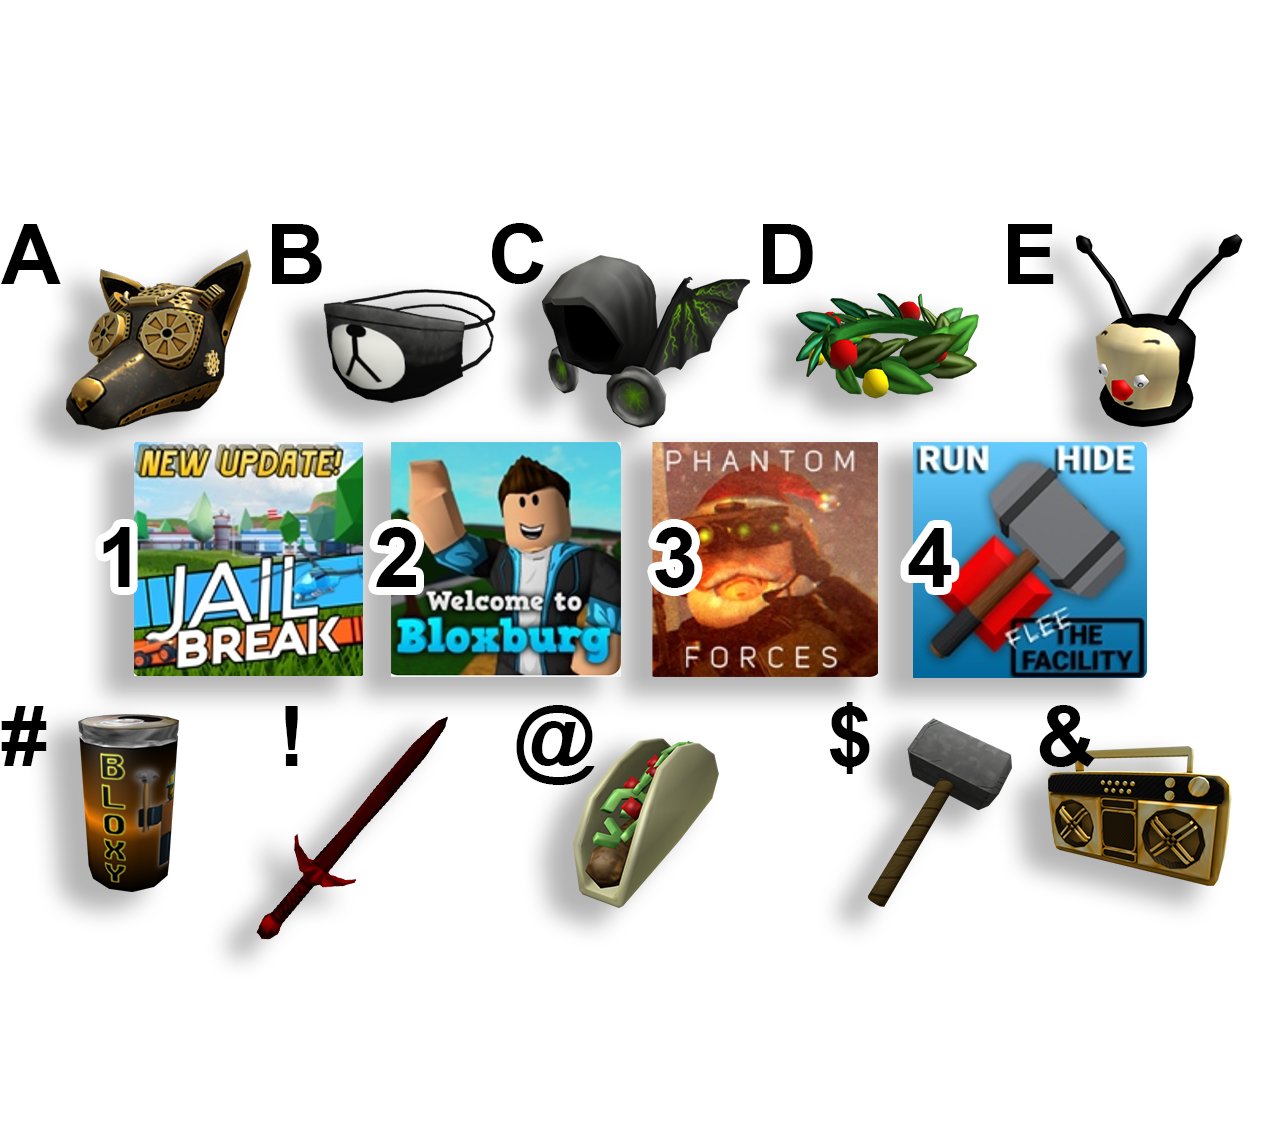 Roblox On Twitter Which Combo Are You Picking For The Ultimate Roblox Experience - presidents day roblox sale 2020